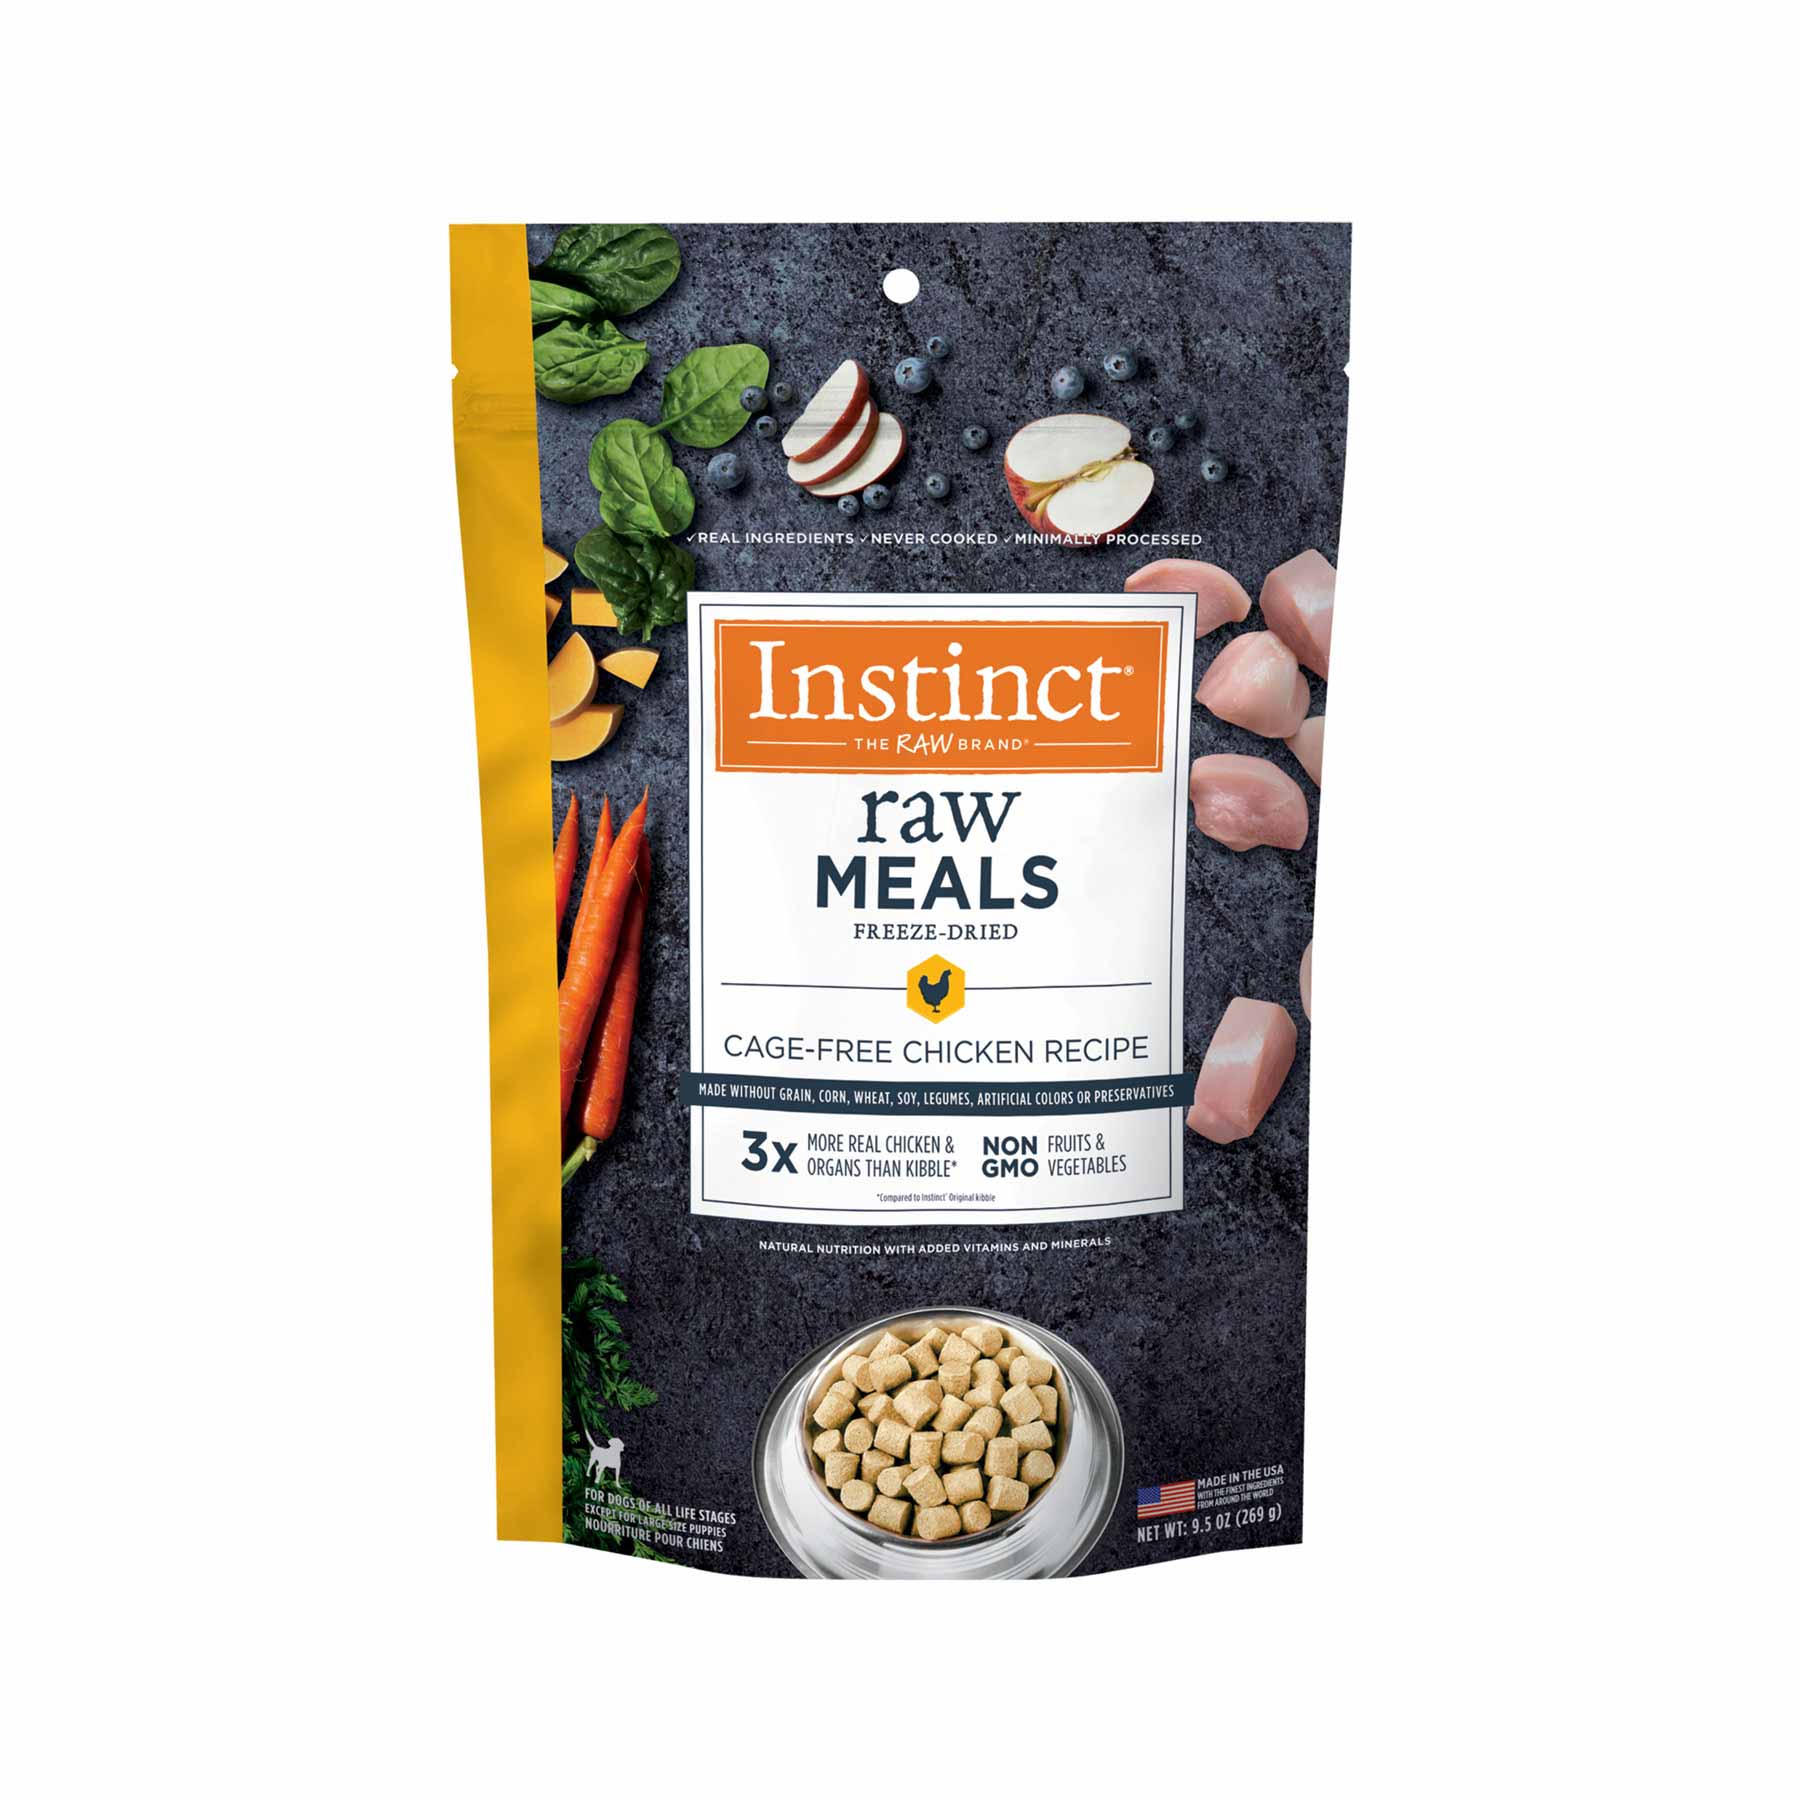 Instinct Freeze-Dried Raw Meals Grain-Free Cage-Free Chicken Recipe Dog Food, 9.5 Ounce Bag